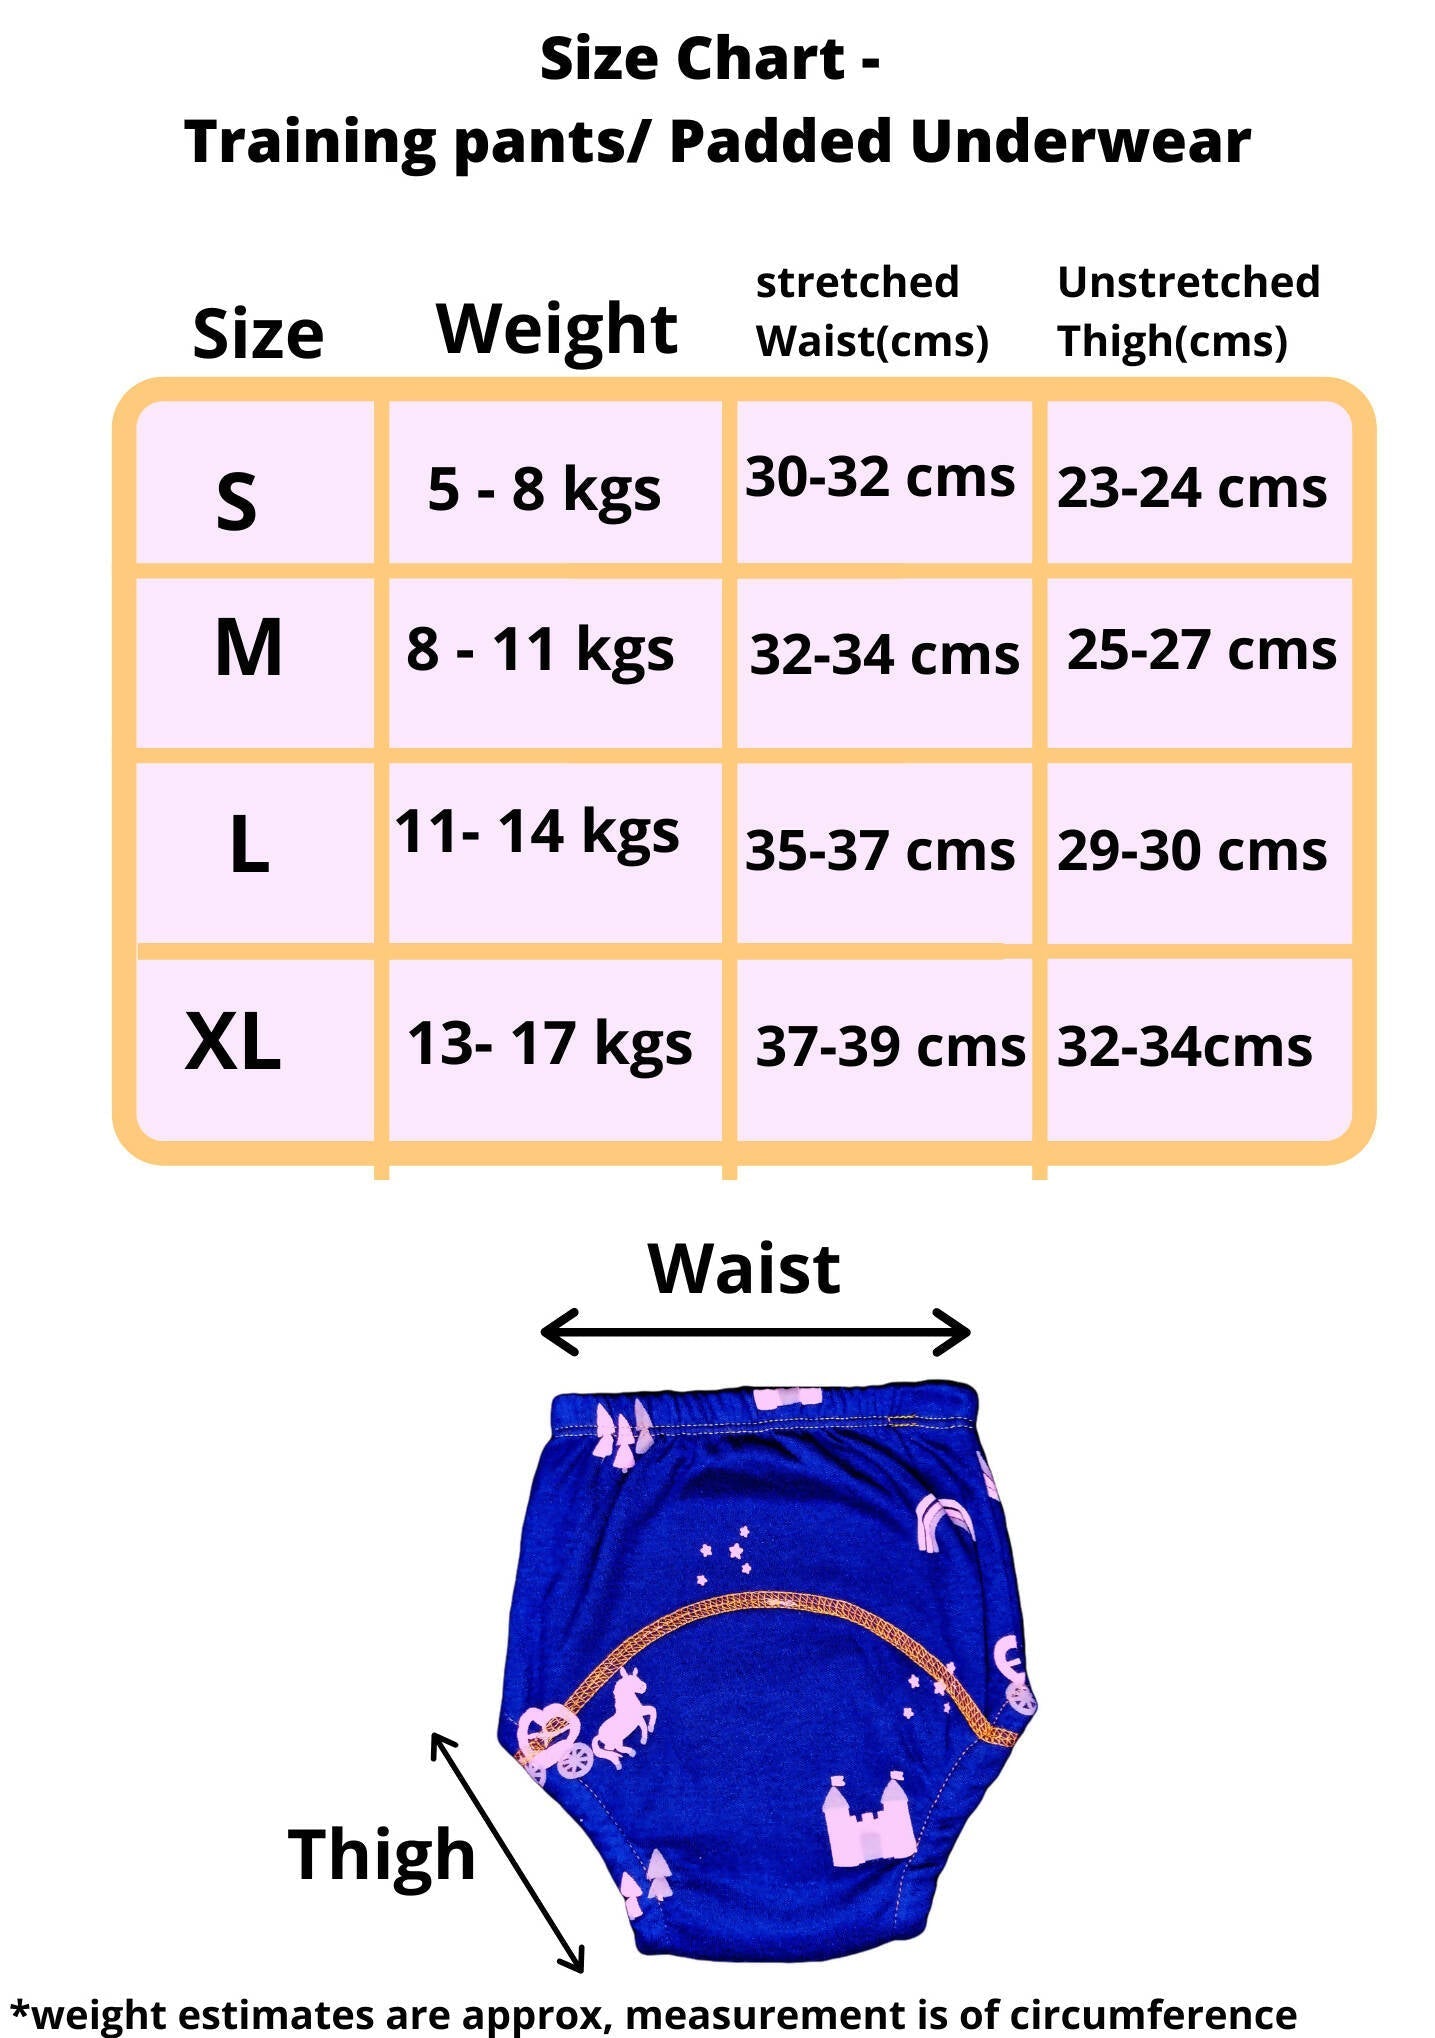 Kindermum Cotton Padded Pull Up Training Pants/ Padded Underwear For Kids Rugby Sparrow-Set of 2 Pcs